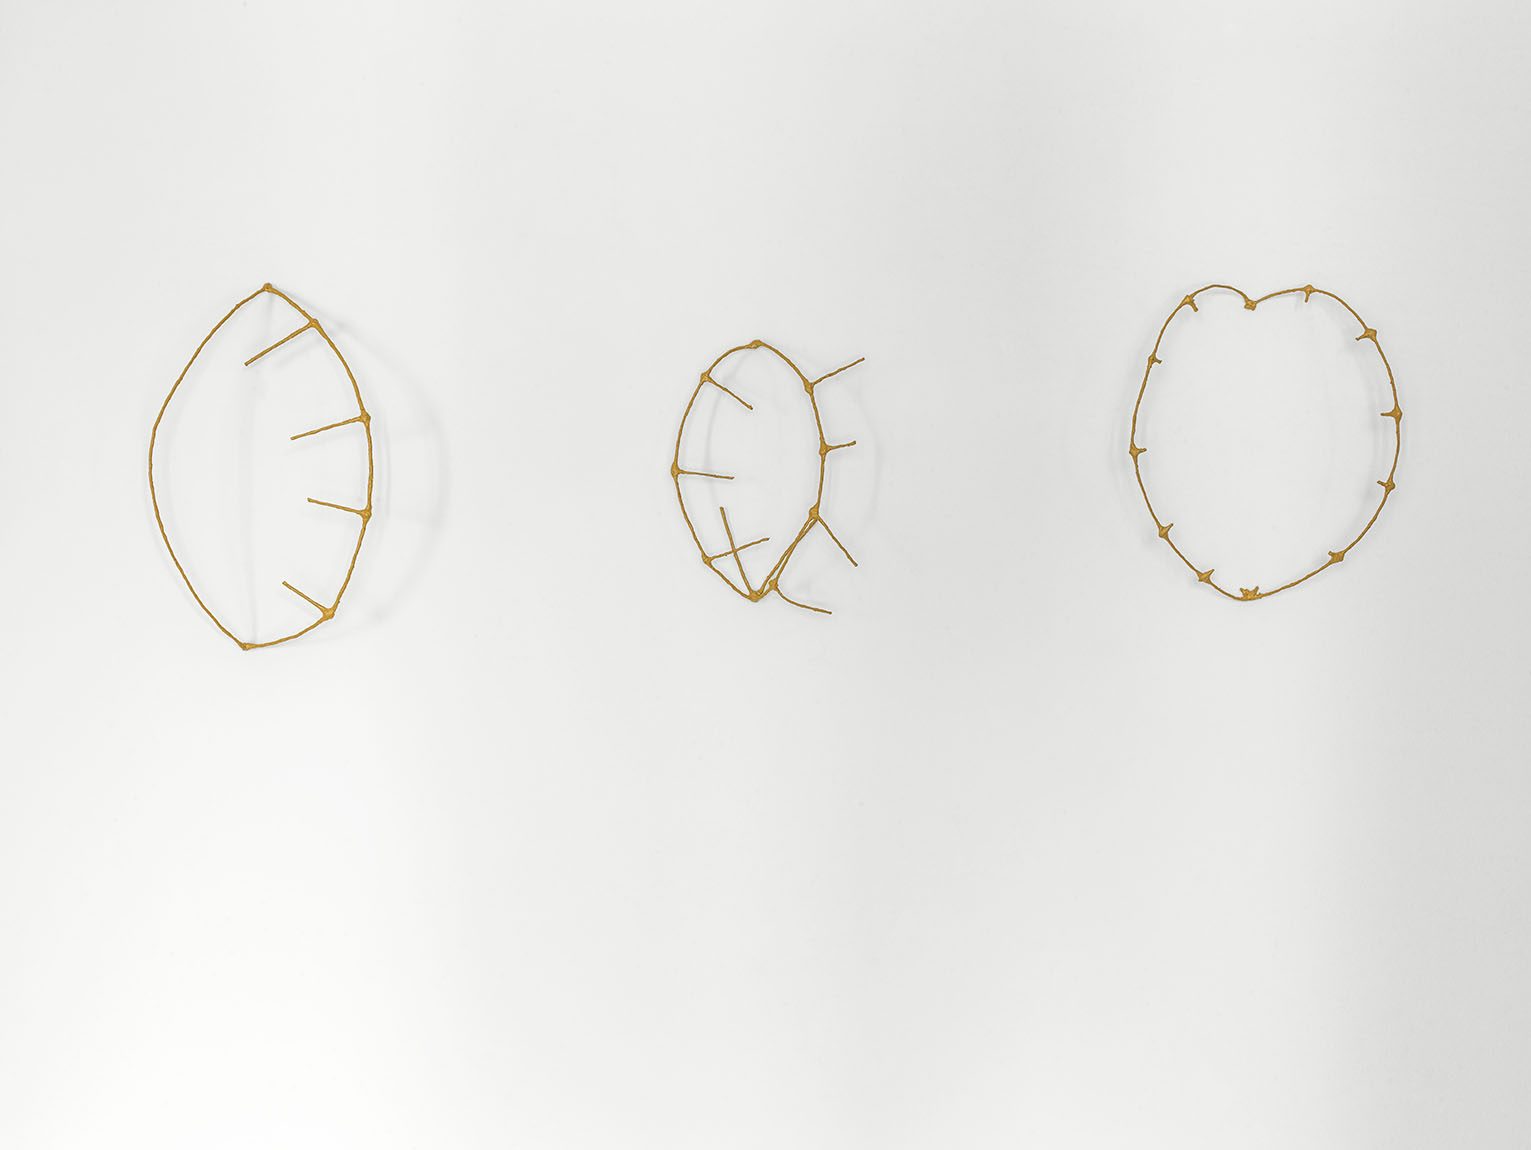 Three yellow wire sculptures in the shape of ochre traps hanging side by side on a white wall